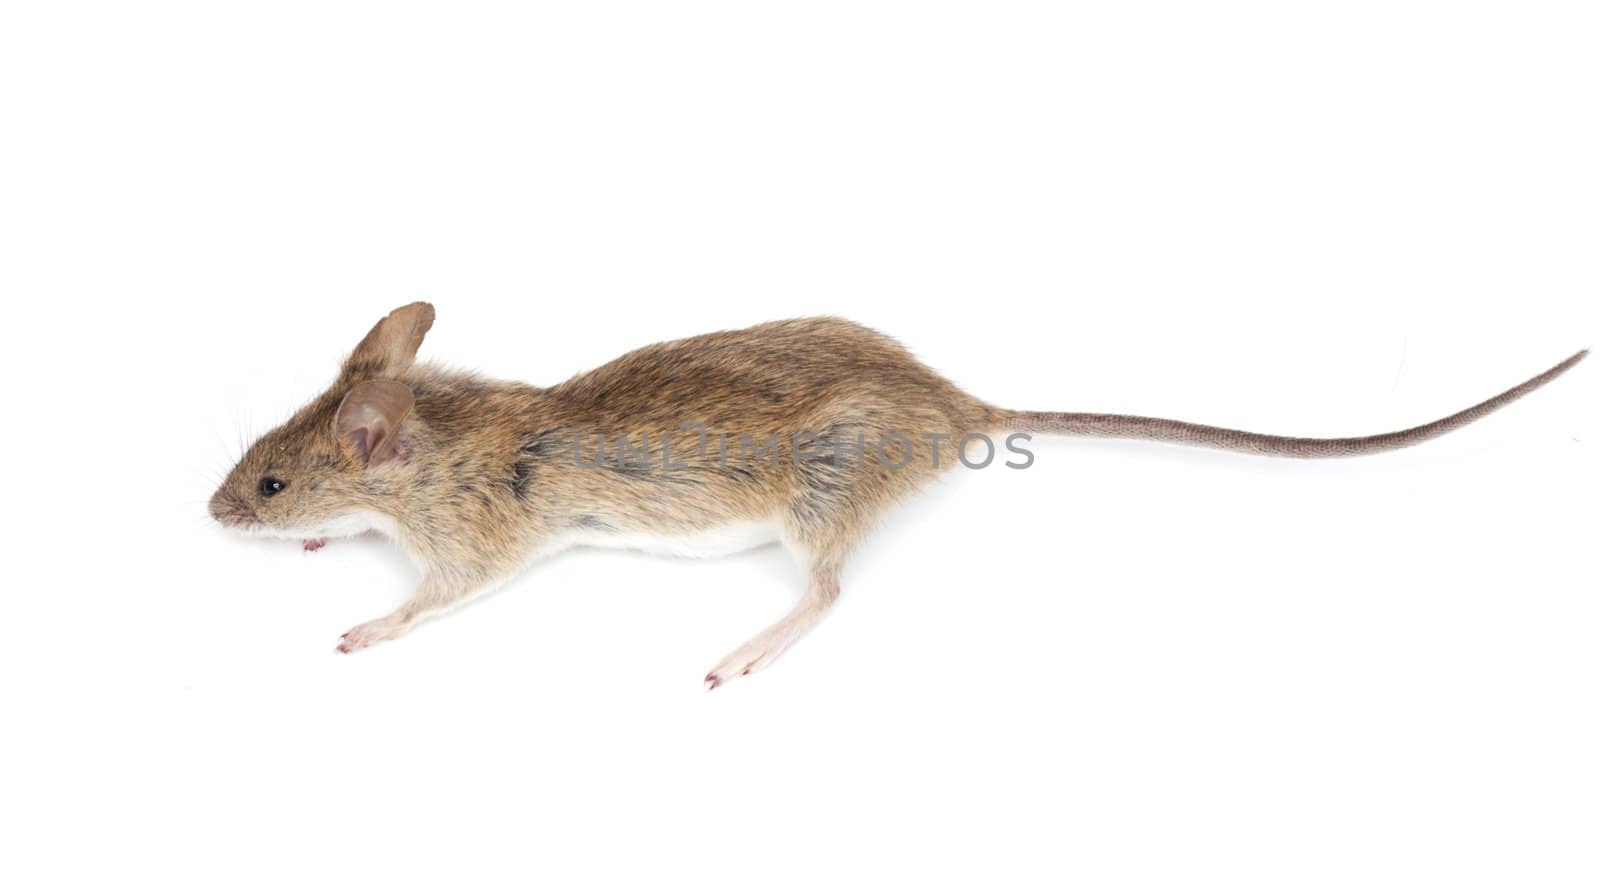 mouse on a white background by schankz